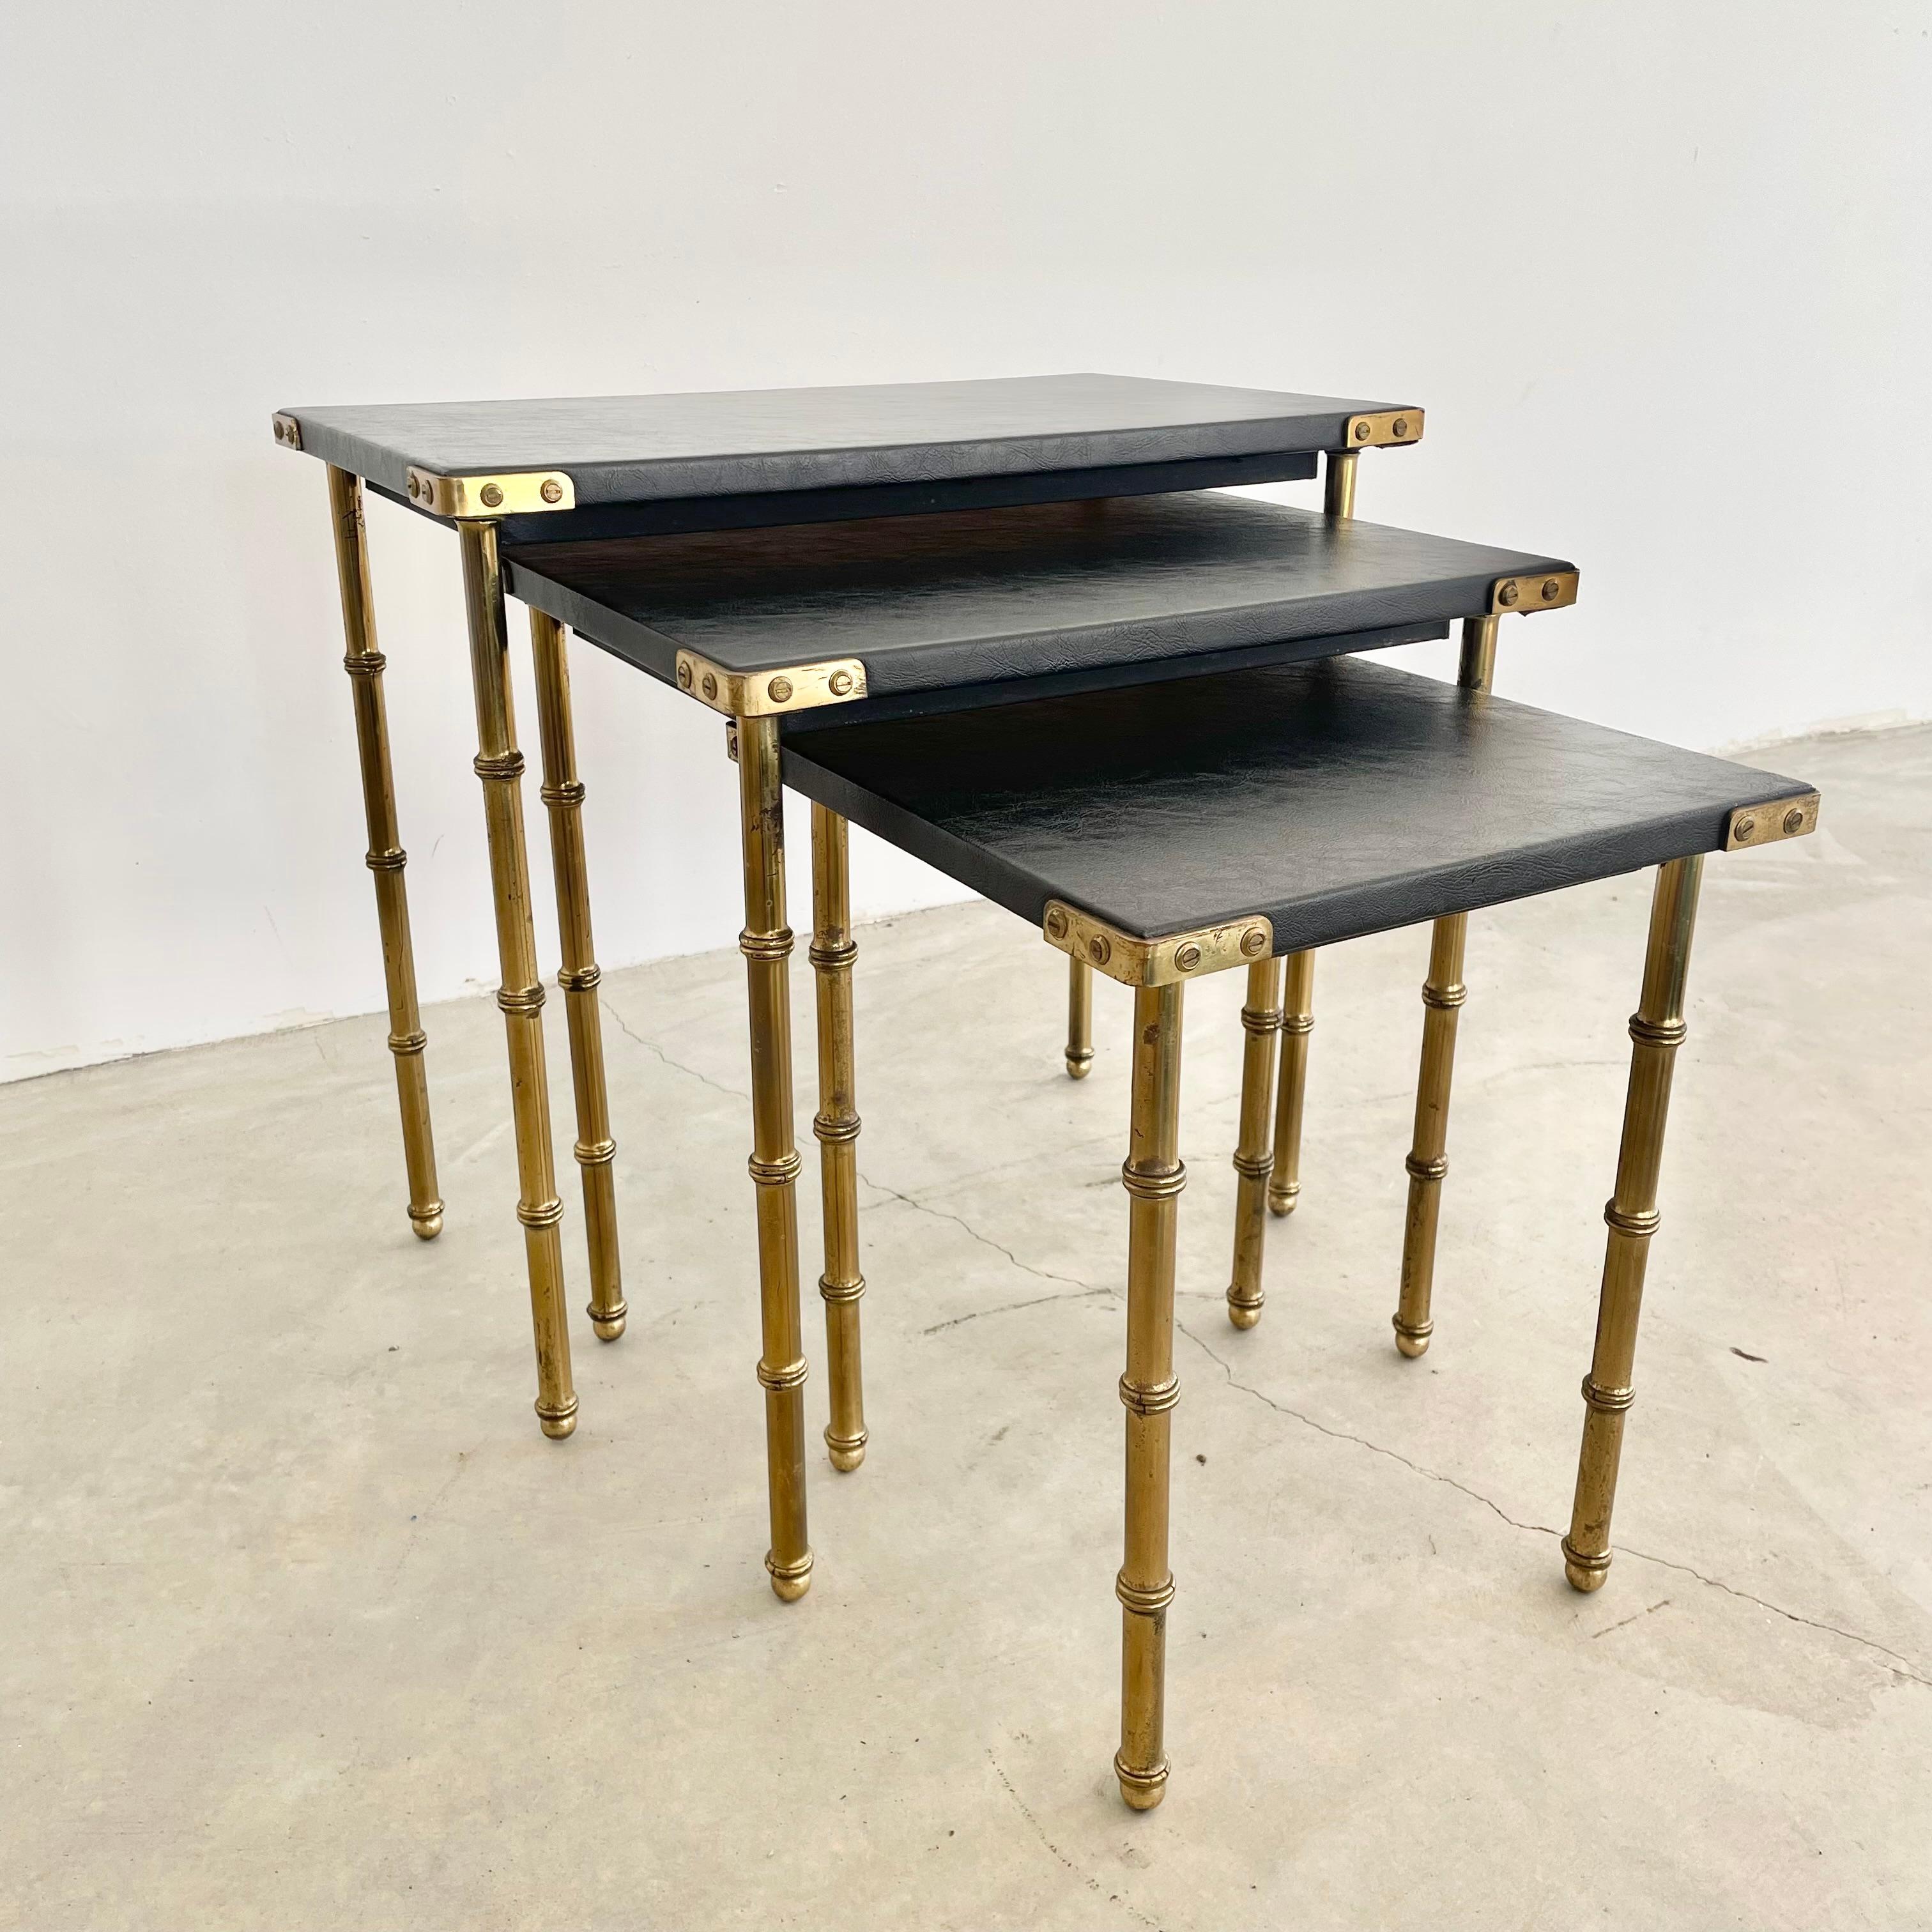 Beautiful set of 3 nesting tables by French designer Jacques Adnet. Table tops are wrapped in black skai with brass legs and hardware and brass ball feet. Tabletop edges are brass brackets with brass screw detailing. Great vintage condition. Very